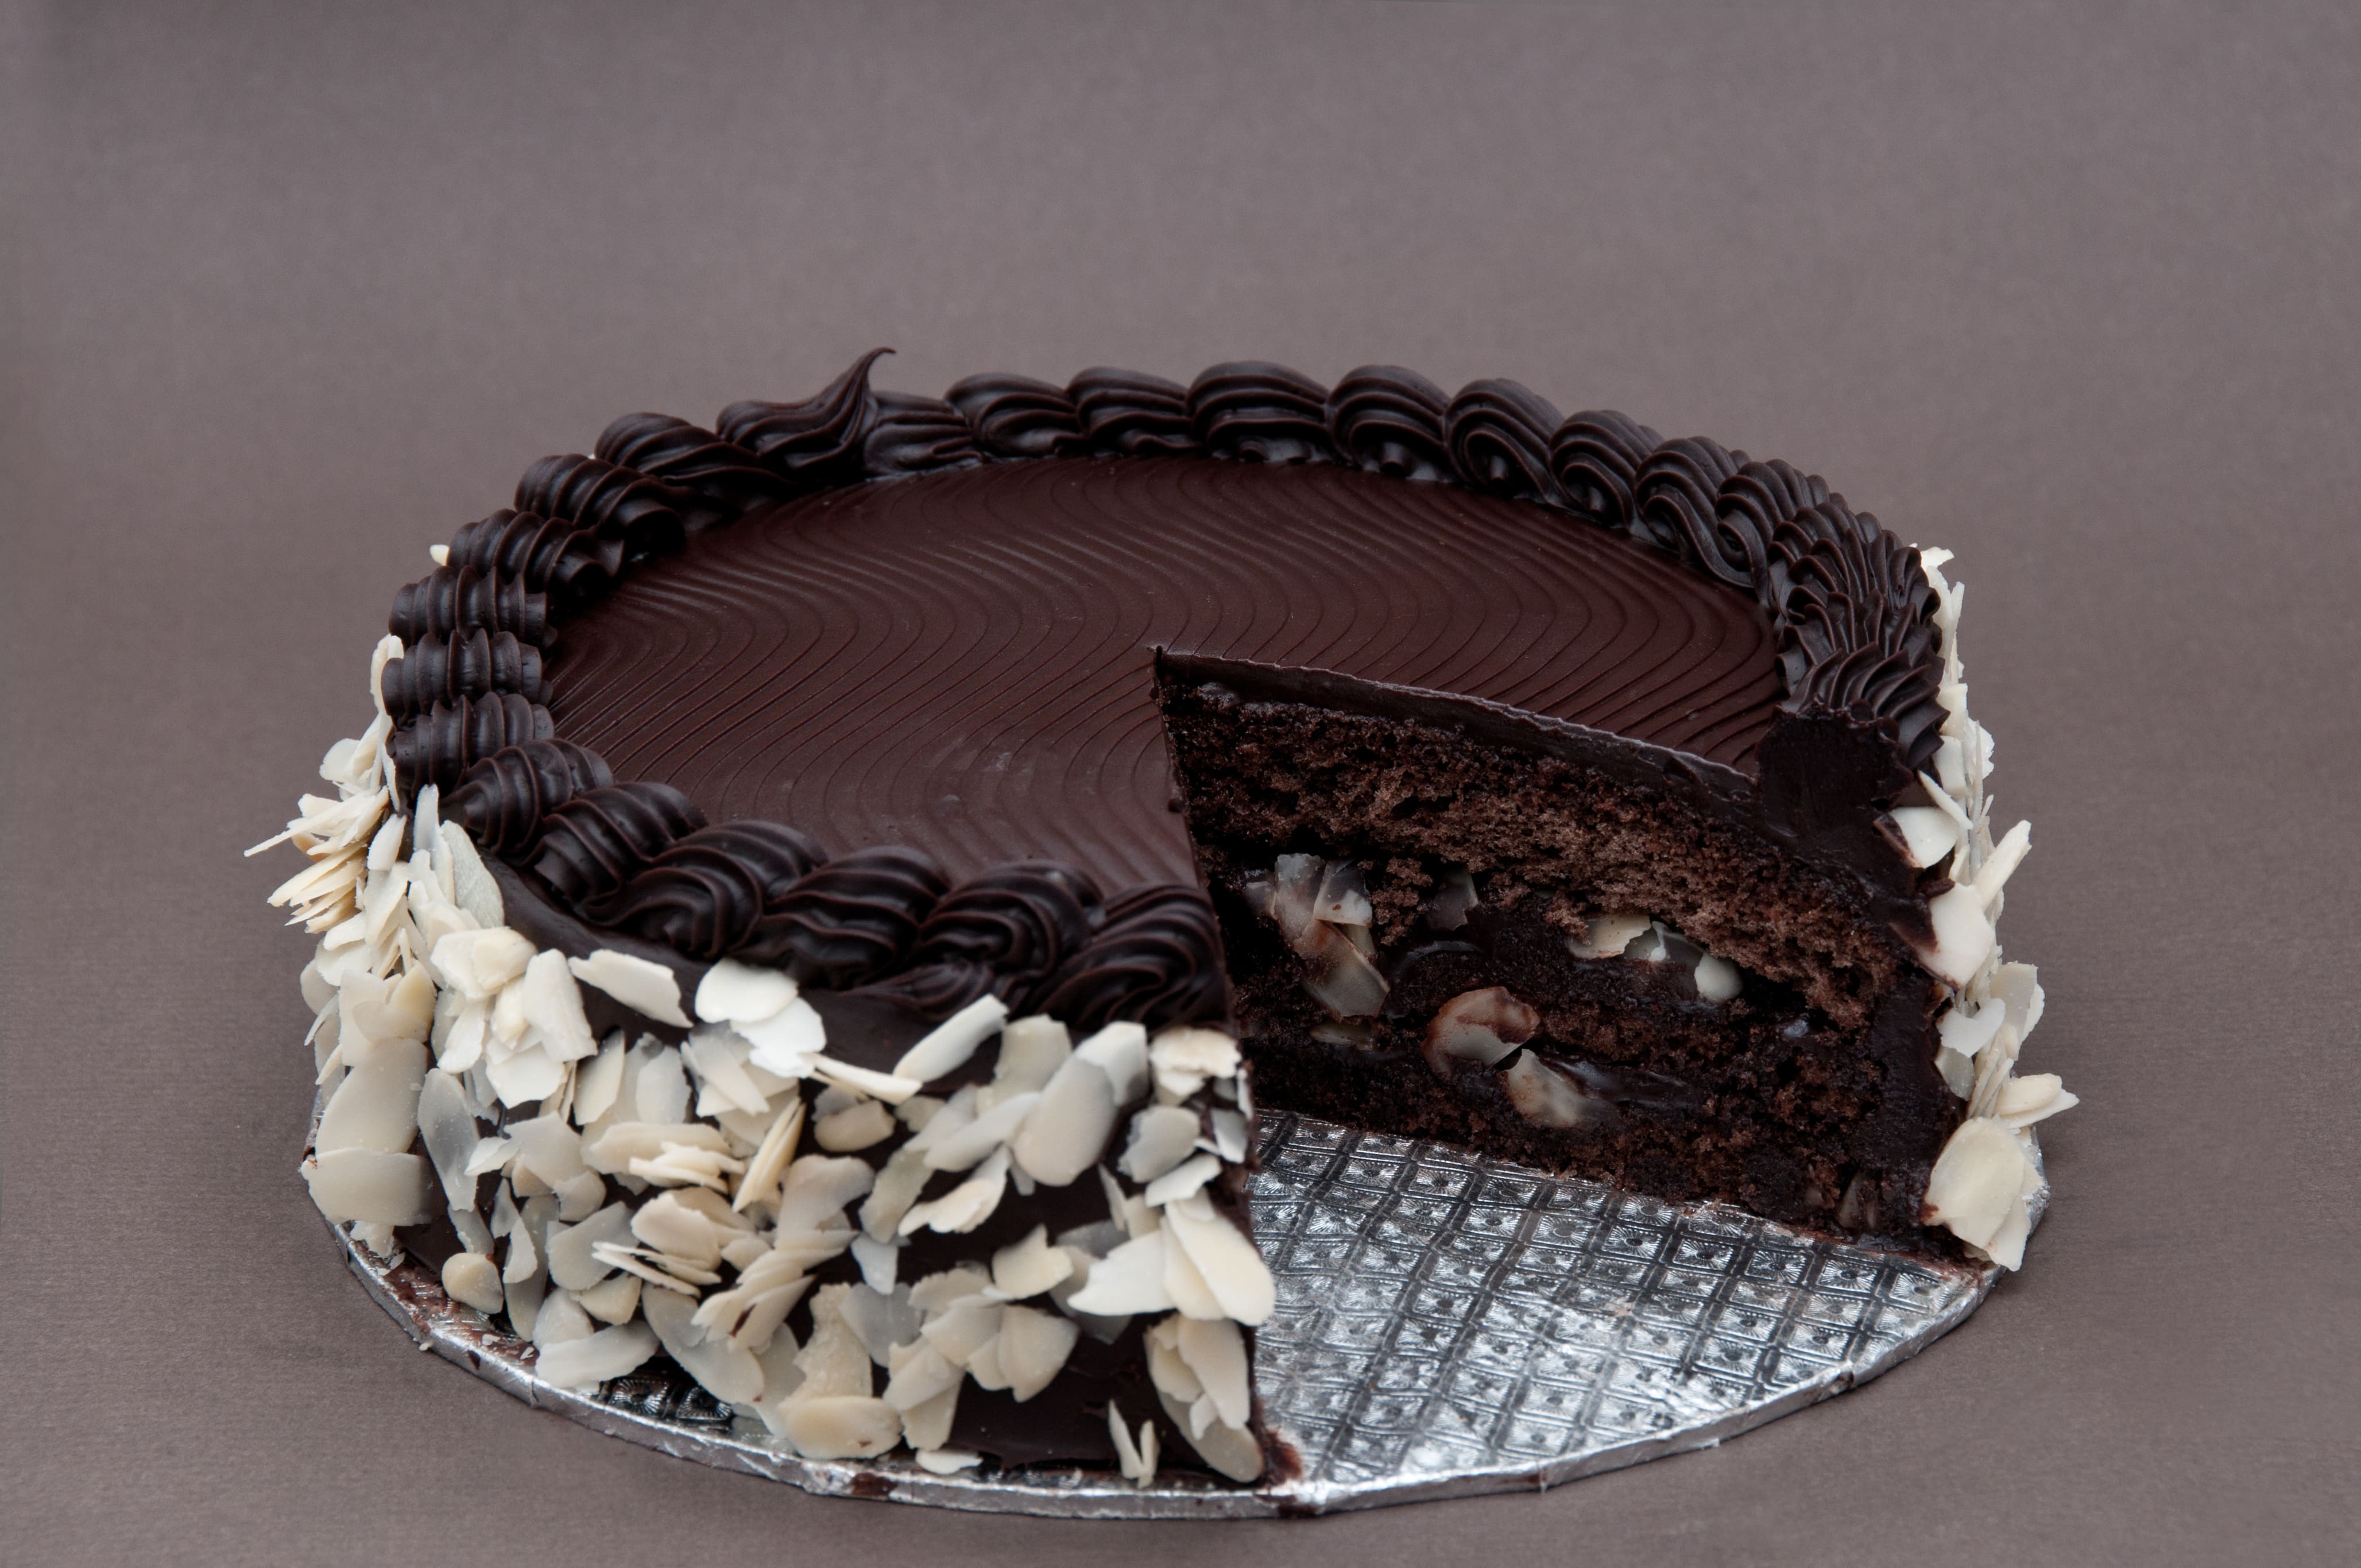 Buy Copper Chocs Fresh Cakes - Choco Truffle Special Online at Best Price  of Rs 340 - bigbasket